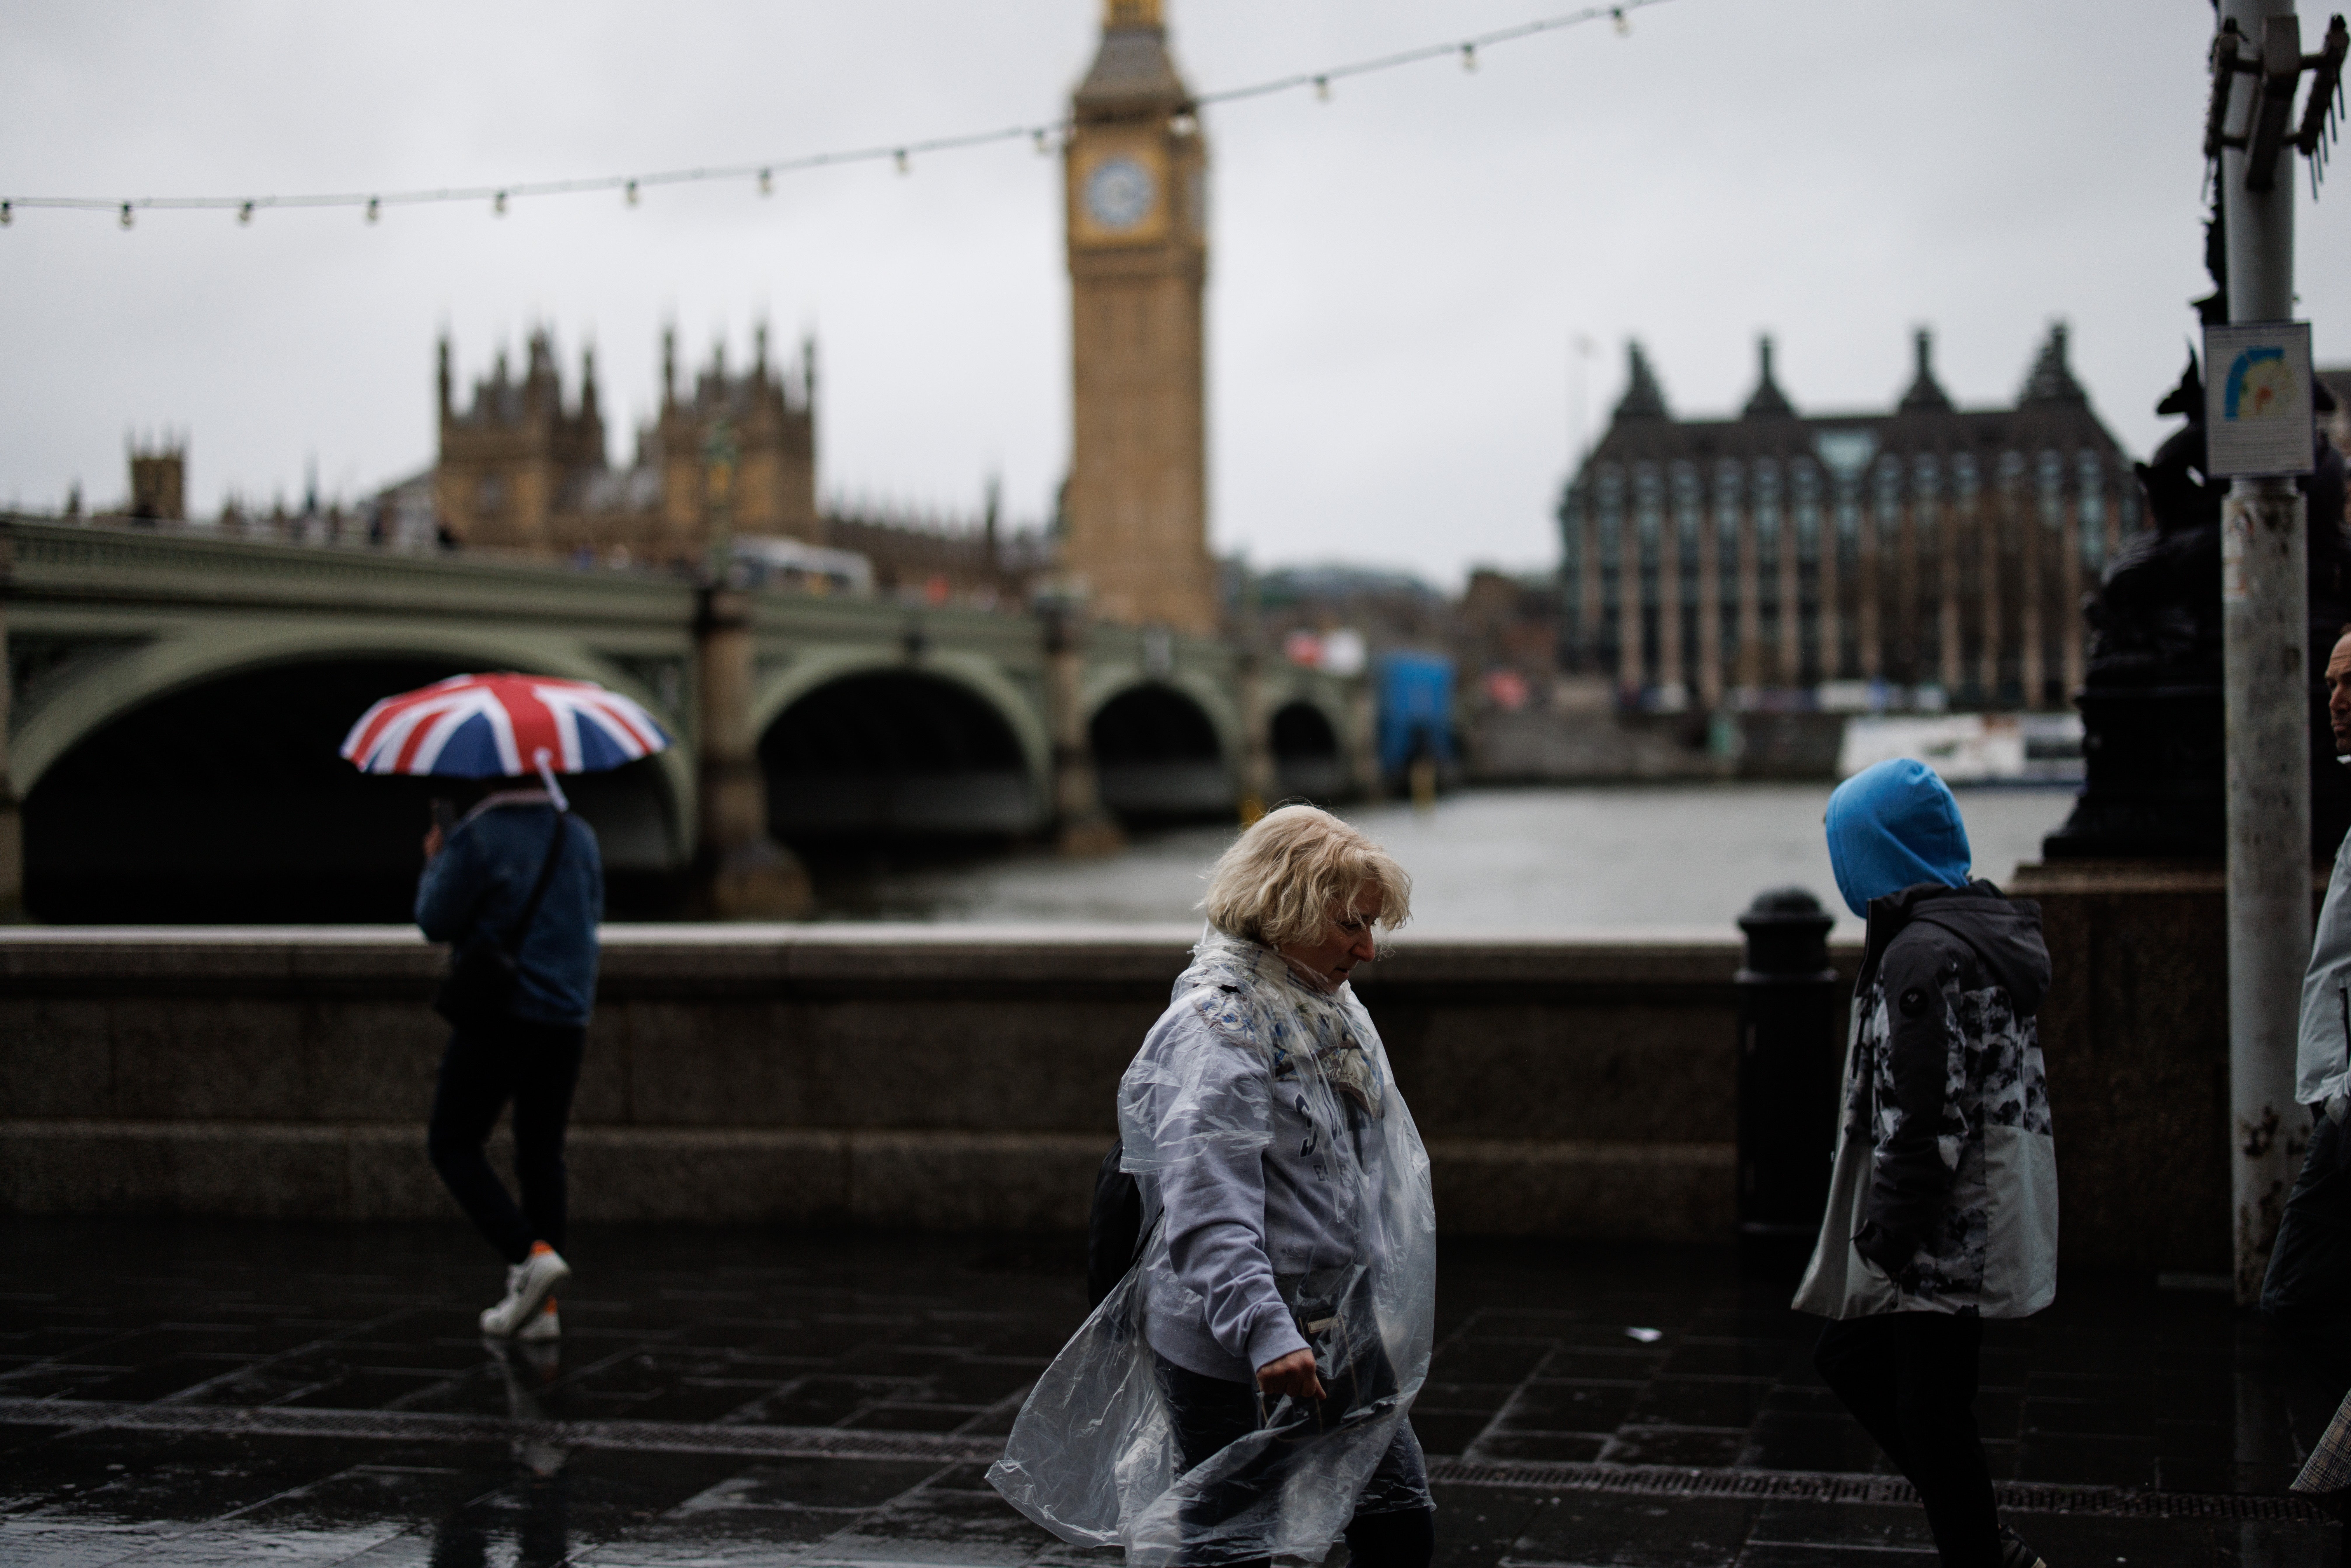 It comes after the UK was hit by thunderstorms on Thursday